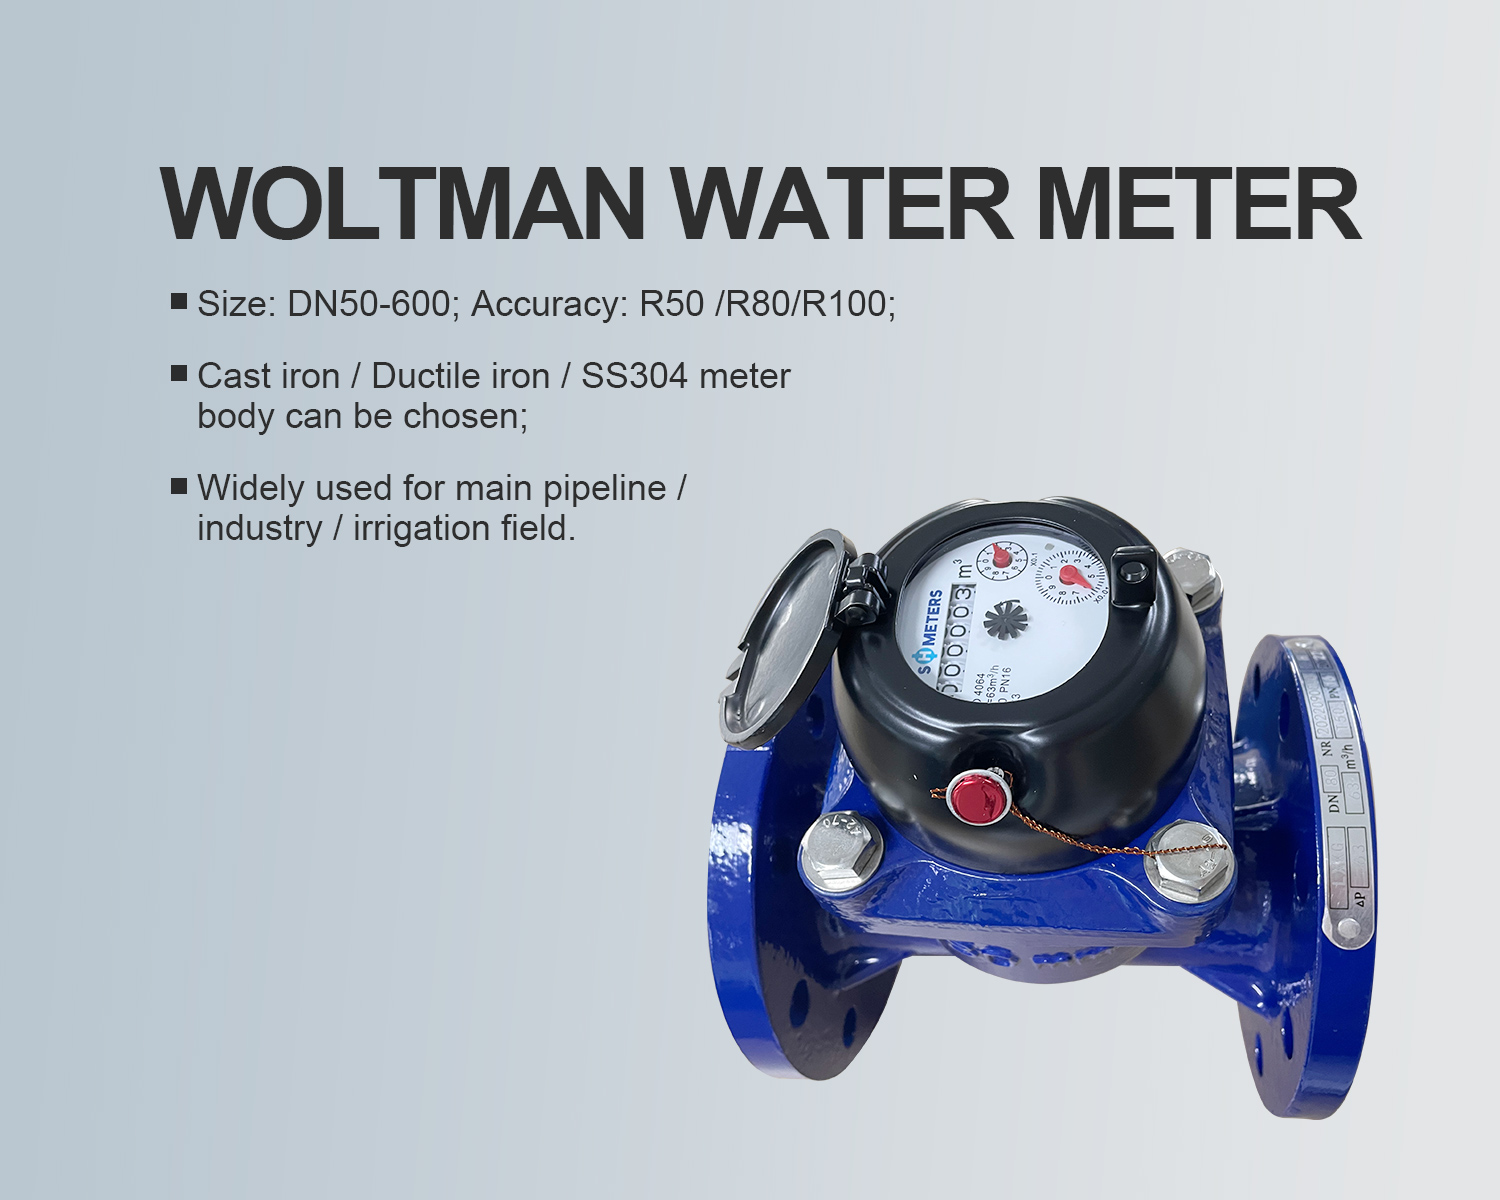 Sand and stones? No problem: water meters from S.H.Meters can handle it all